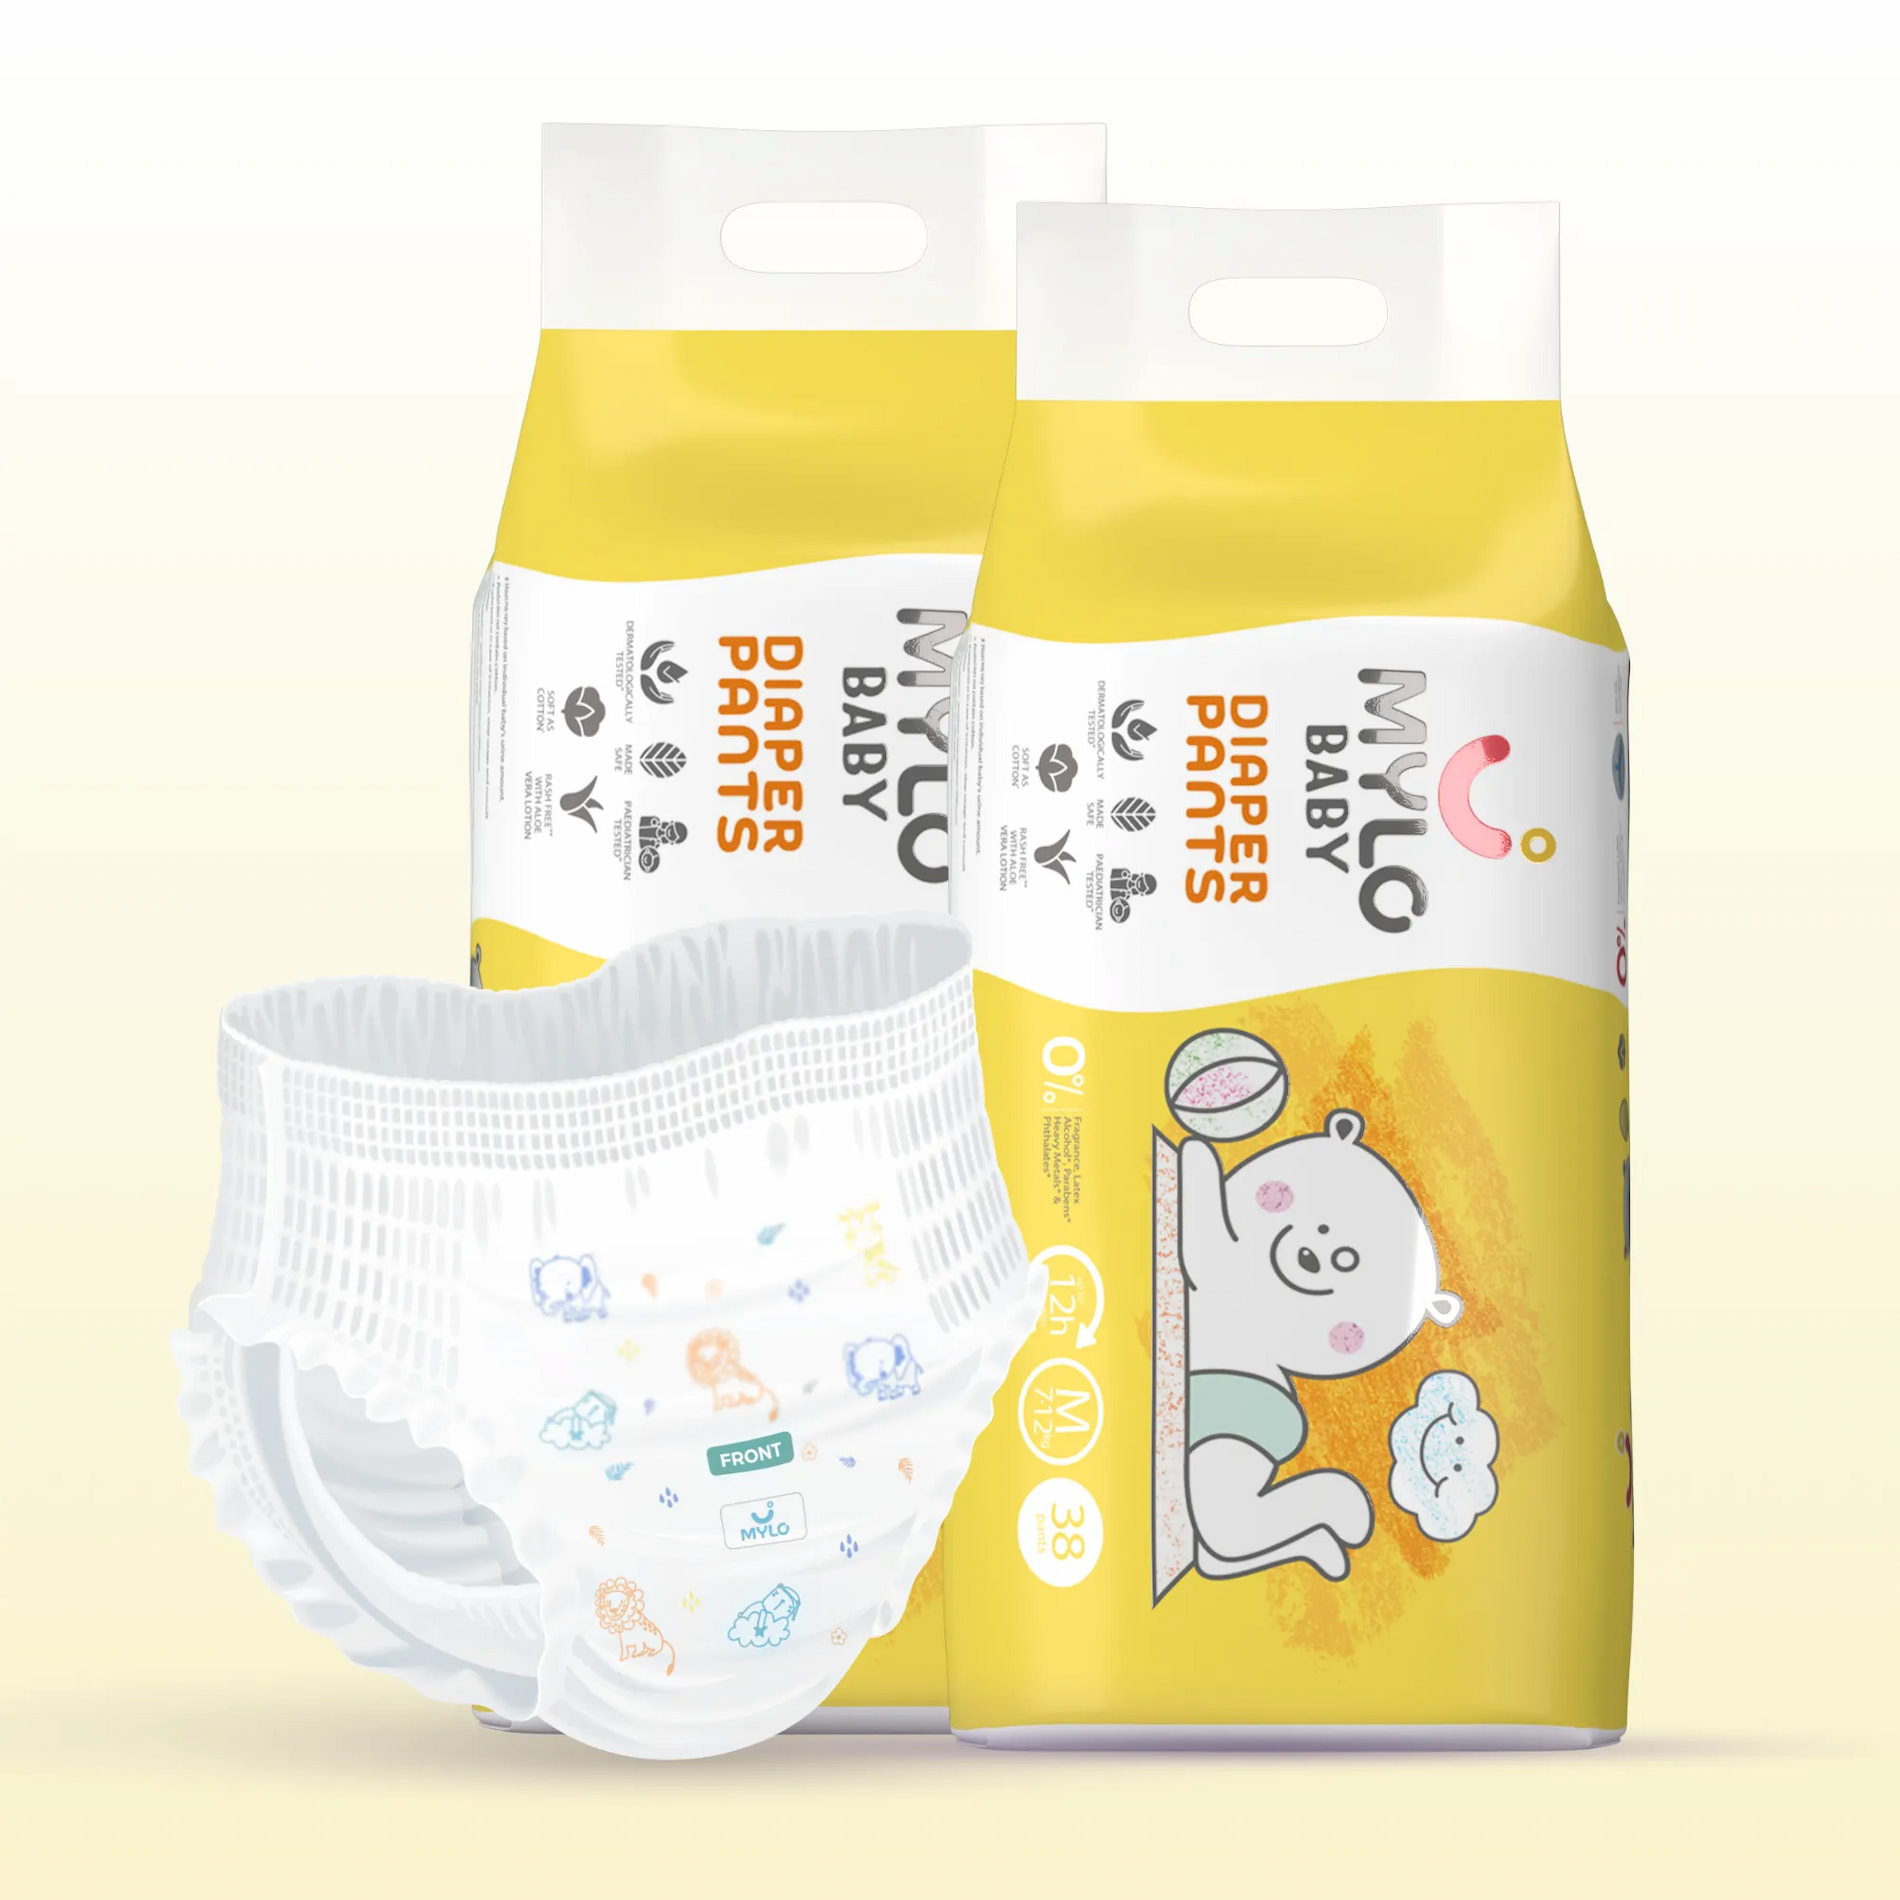 Baby Diaper Pants Medium (M) Size, 7-12 kgs with ADL Technology - 76 Count - 12 Hours Protection